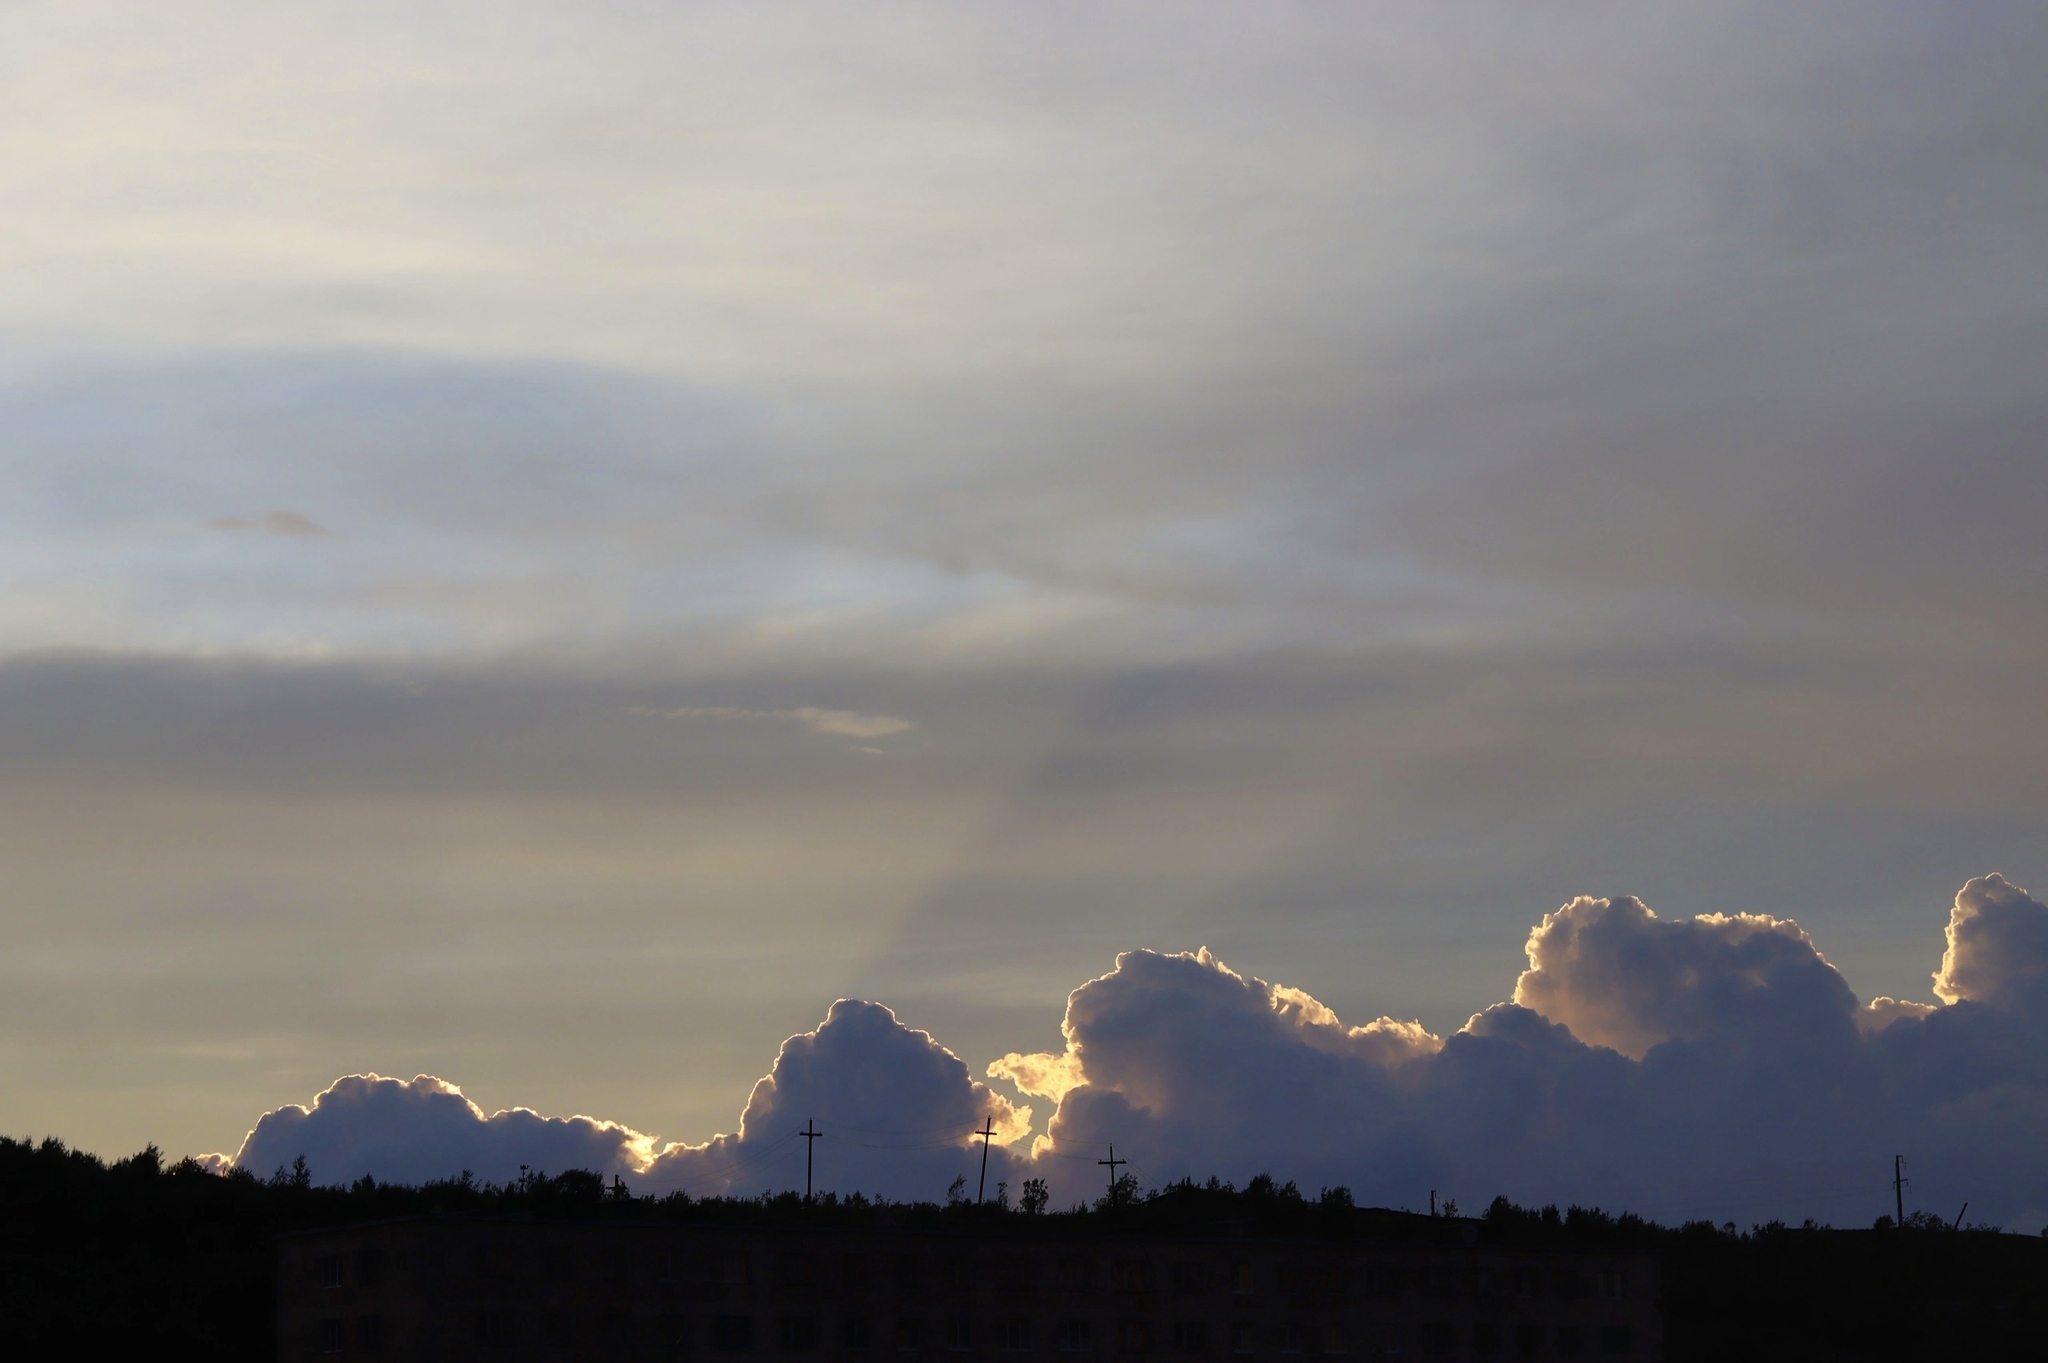 clouds at sunset - My, Murmansk region, Far North, North, Hills, Sunset, Sky, Clouds, The photo, Nature, North